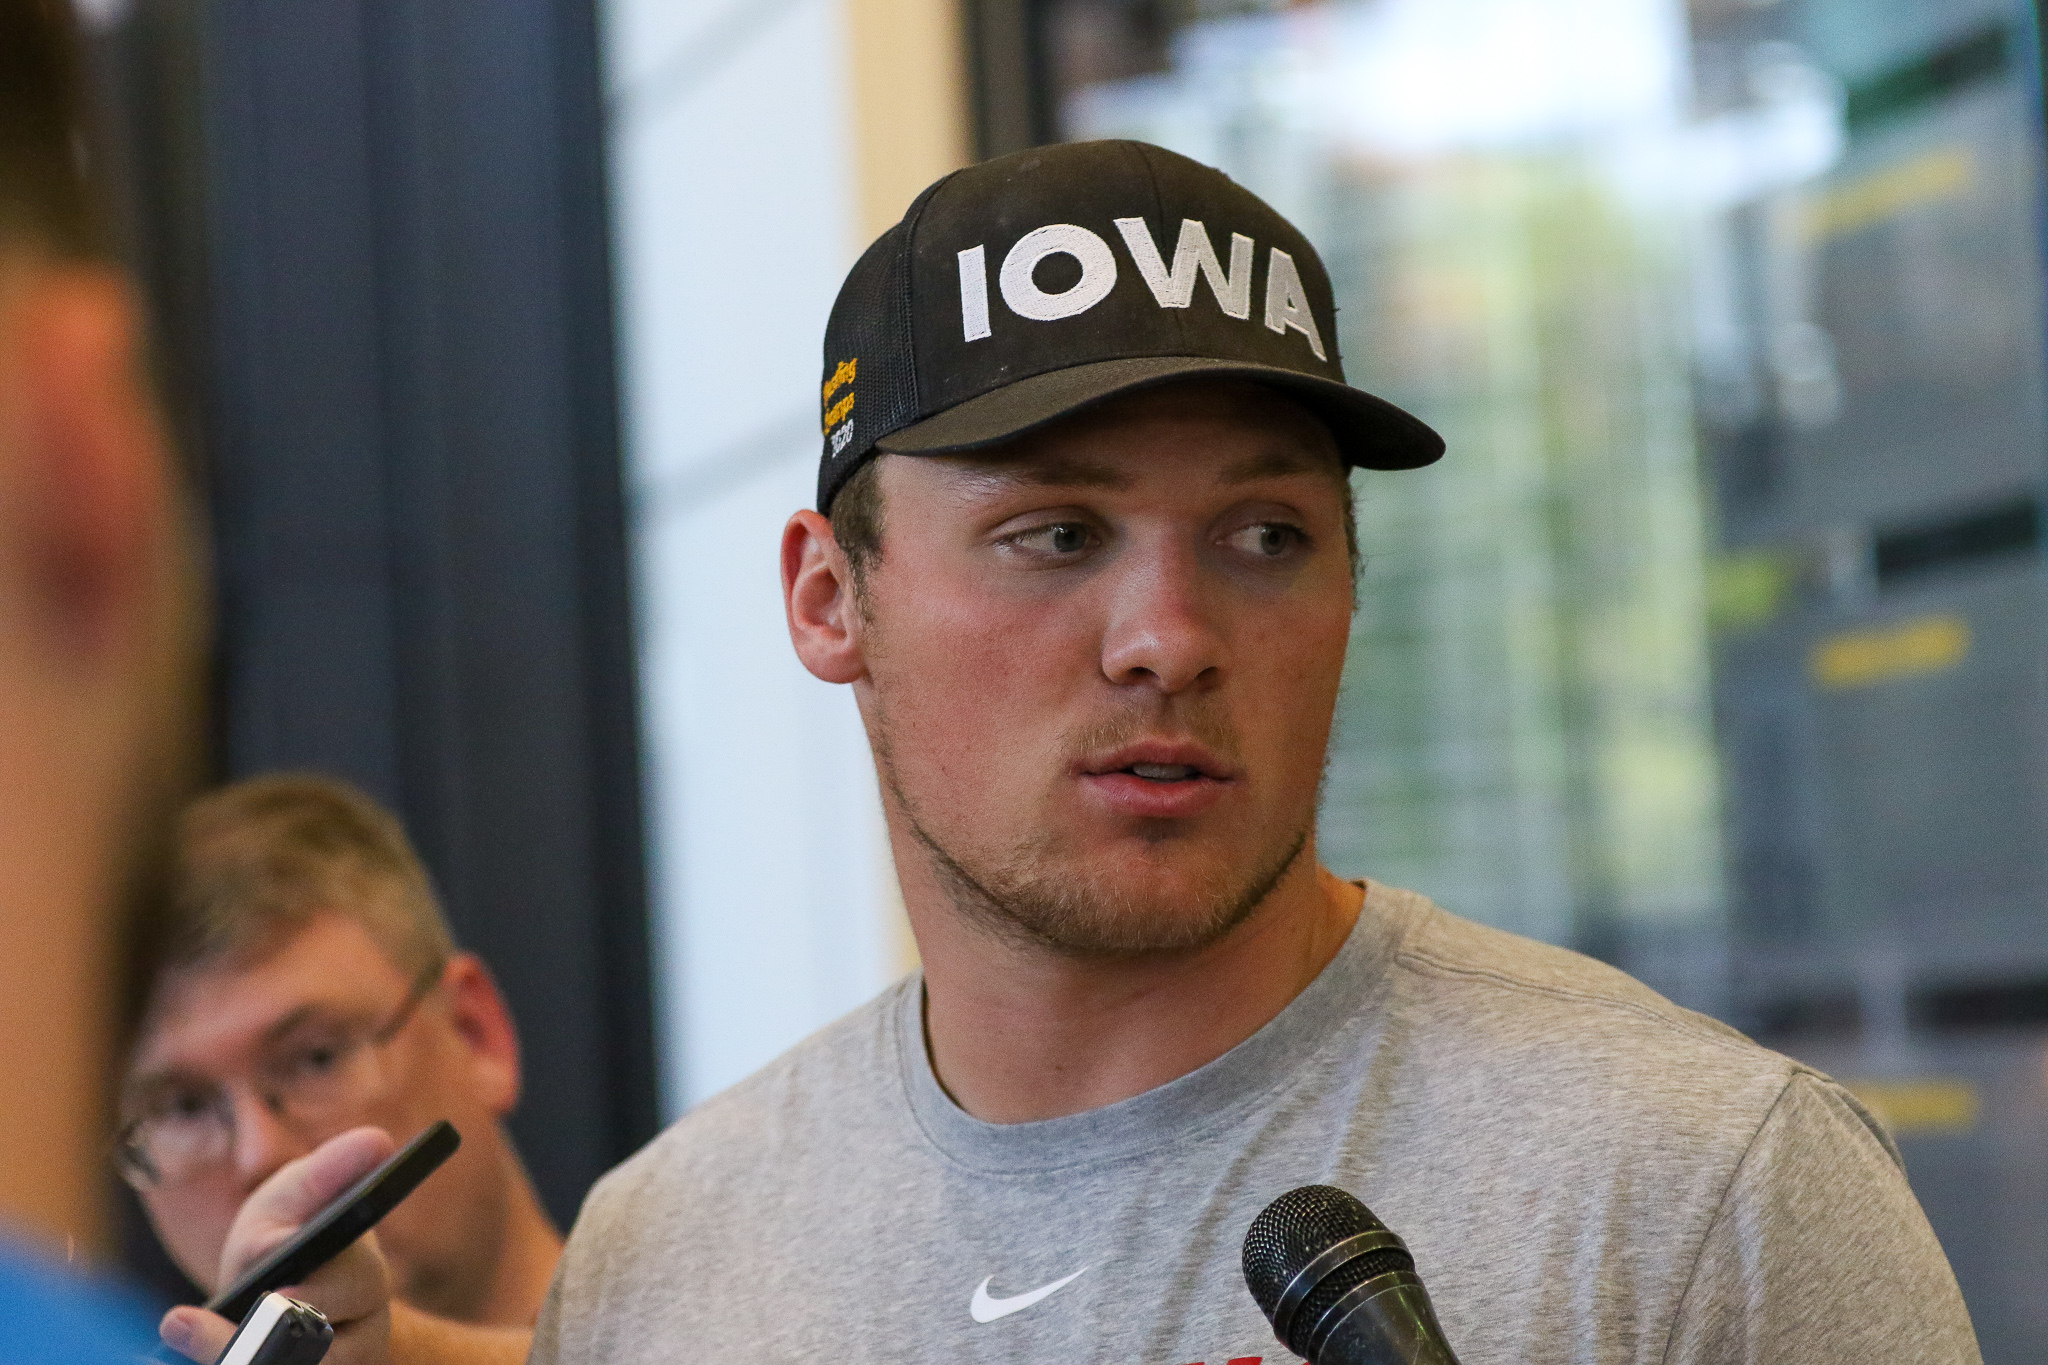 The Daily Iowan  Jack Campbell, Iowa's unconventionally tall